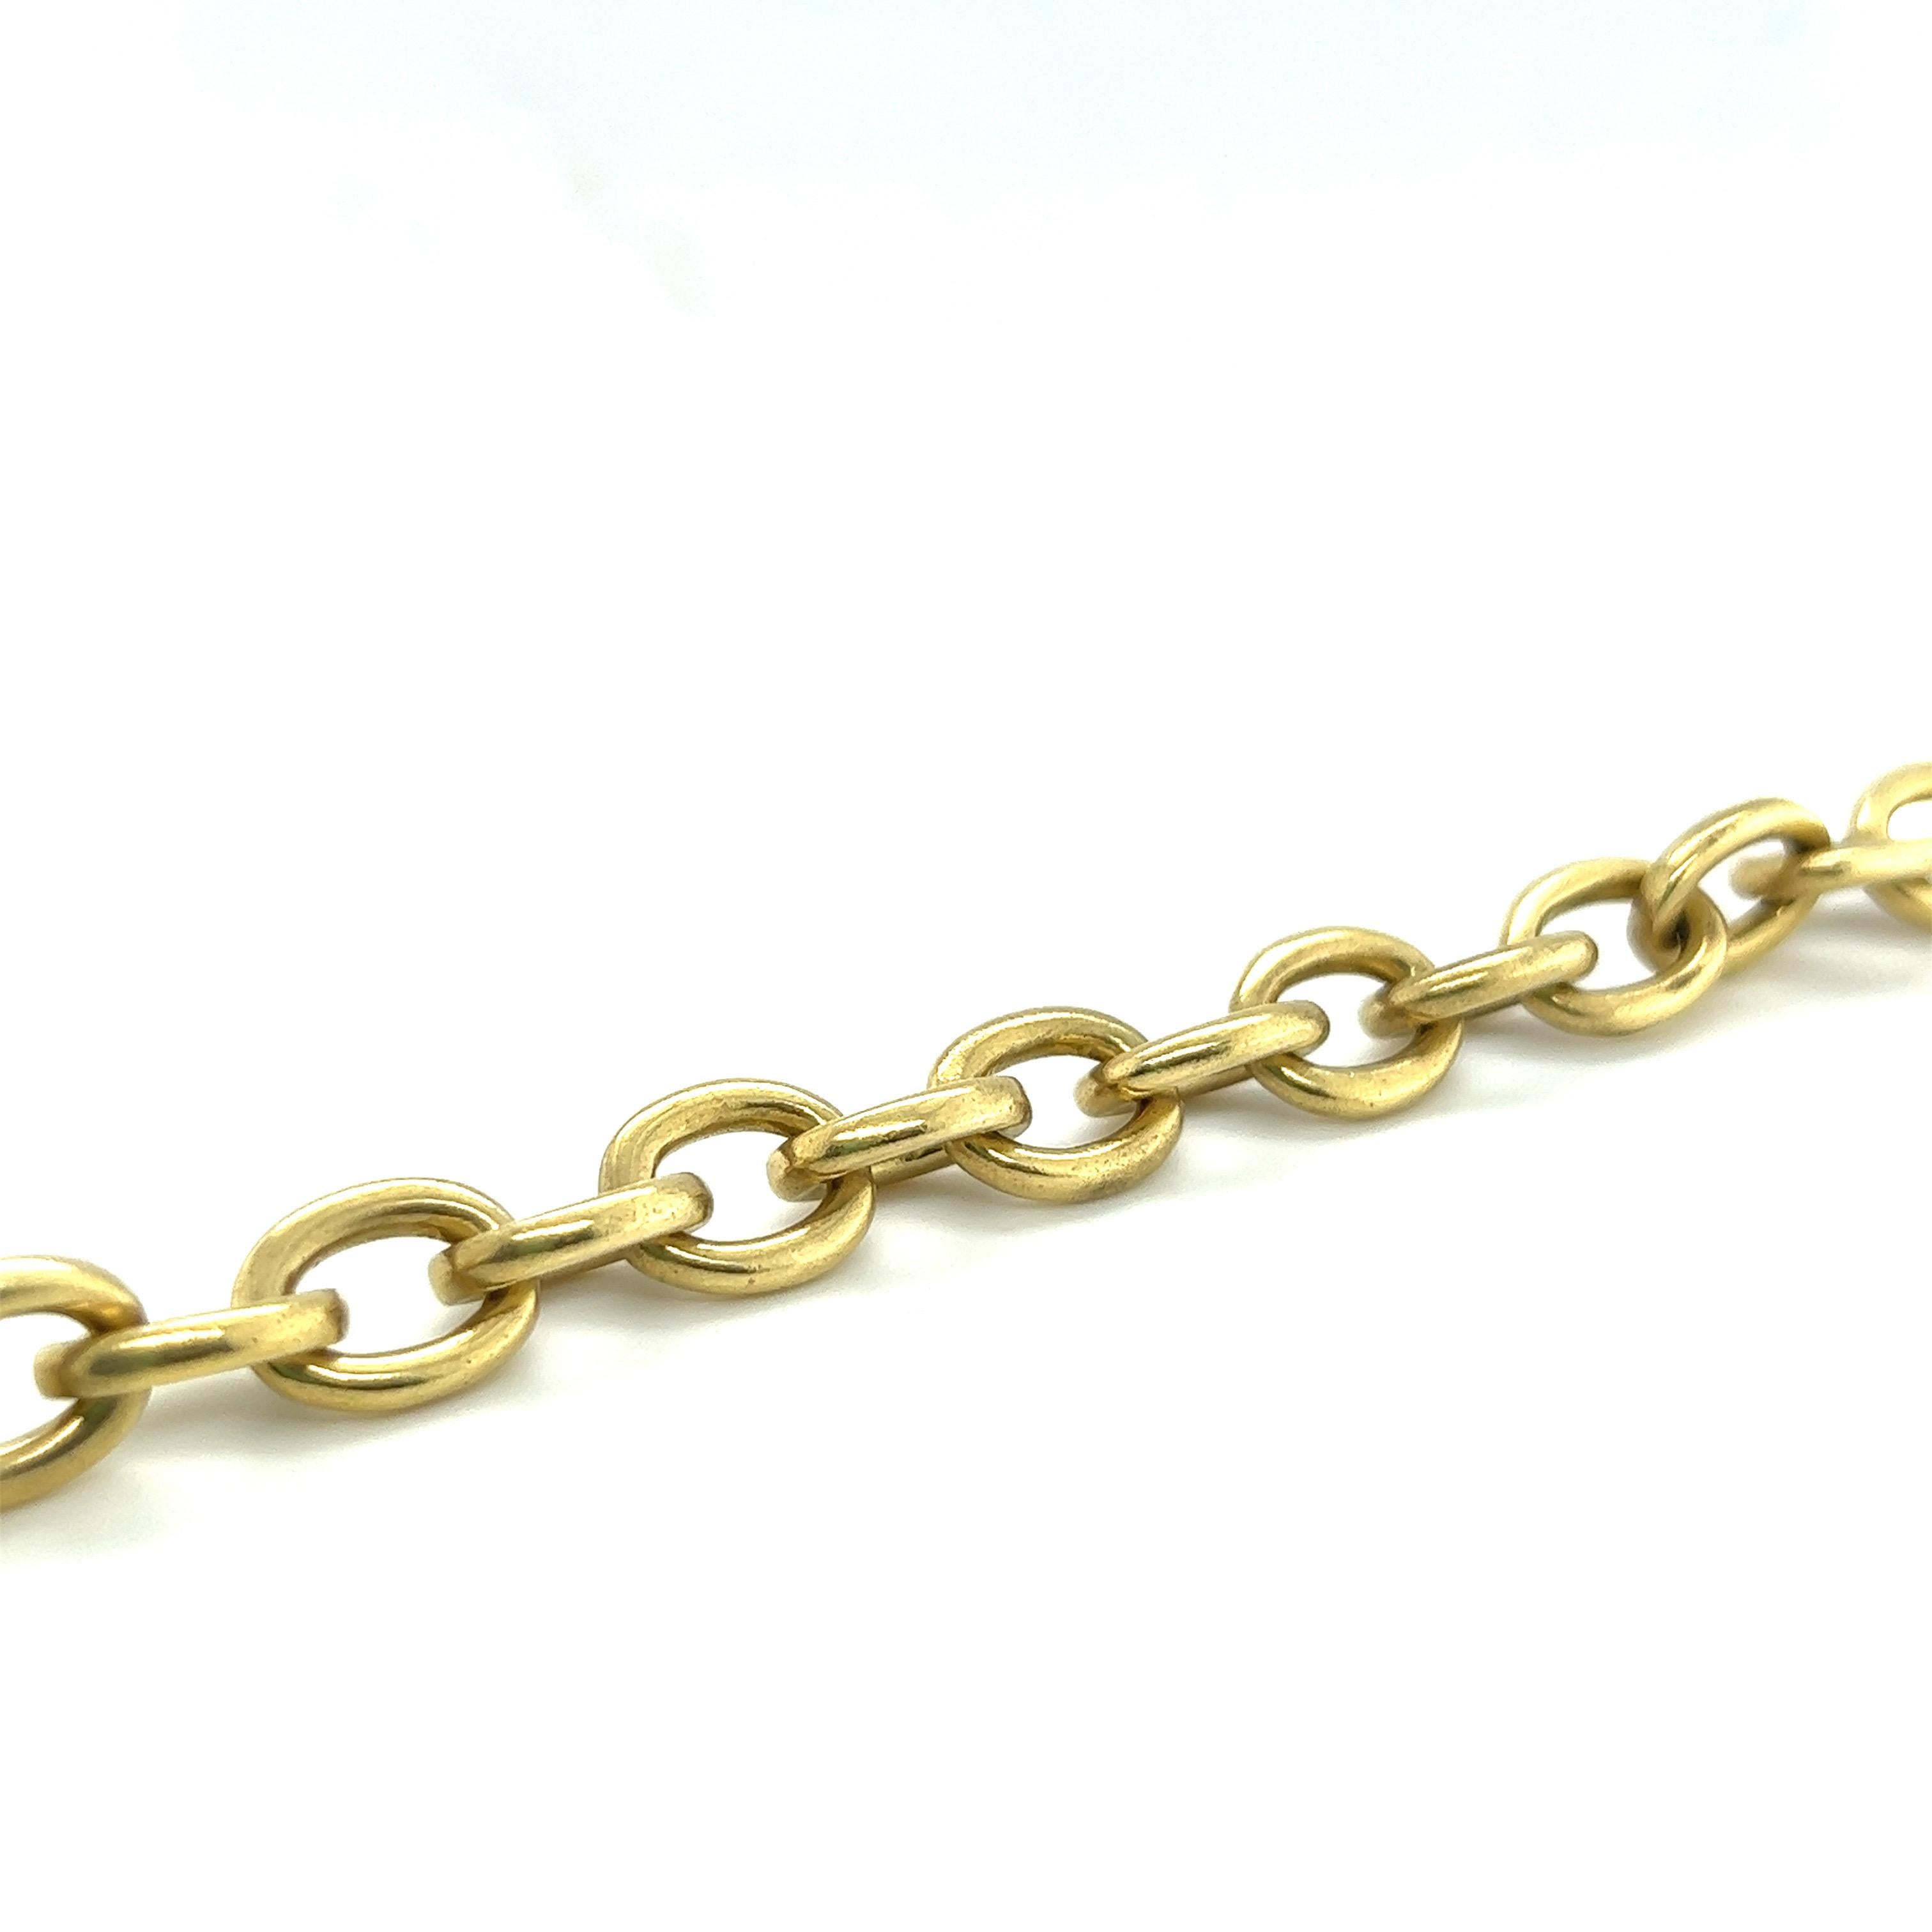 Beautiful 18 karat yellow gold bracelet by Vahe Naltchayan, 1987.

Cable chain bracelet composed of oval yellow gold links. The bracelet is completed by a toggle clasp accented with tiny gold beads. 

Vahe Naltchayan is a Lebanese jewelry designer.